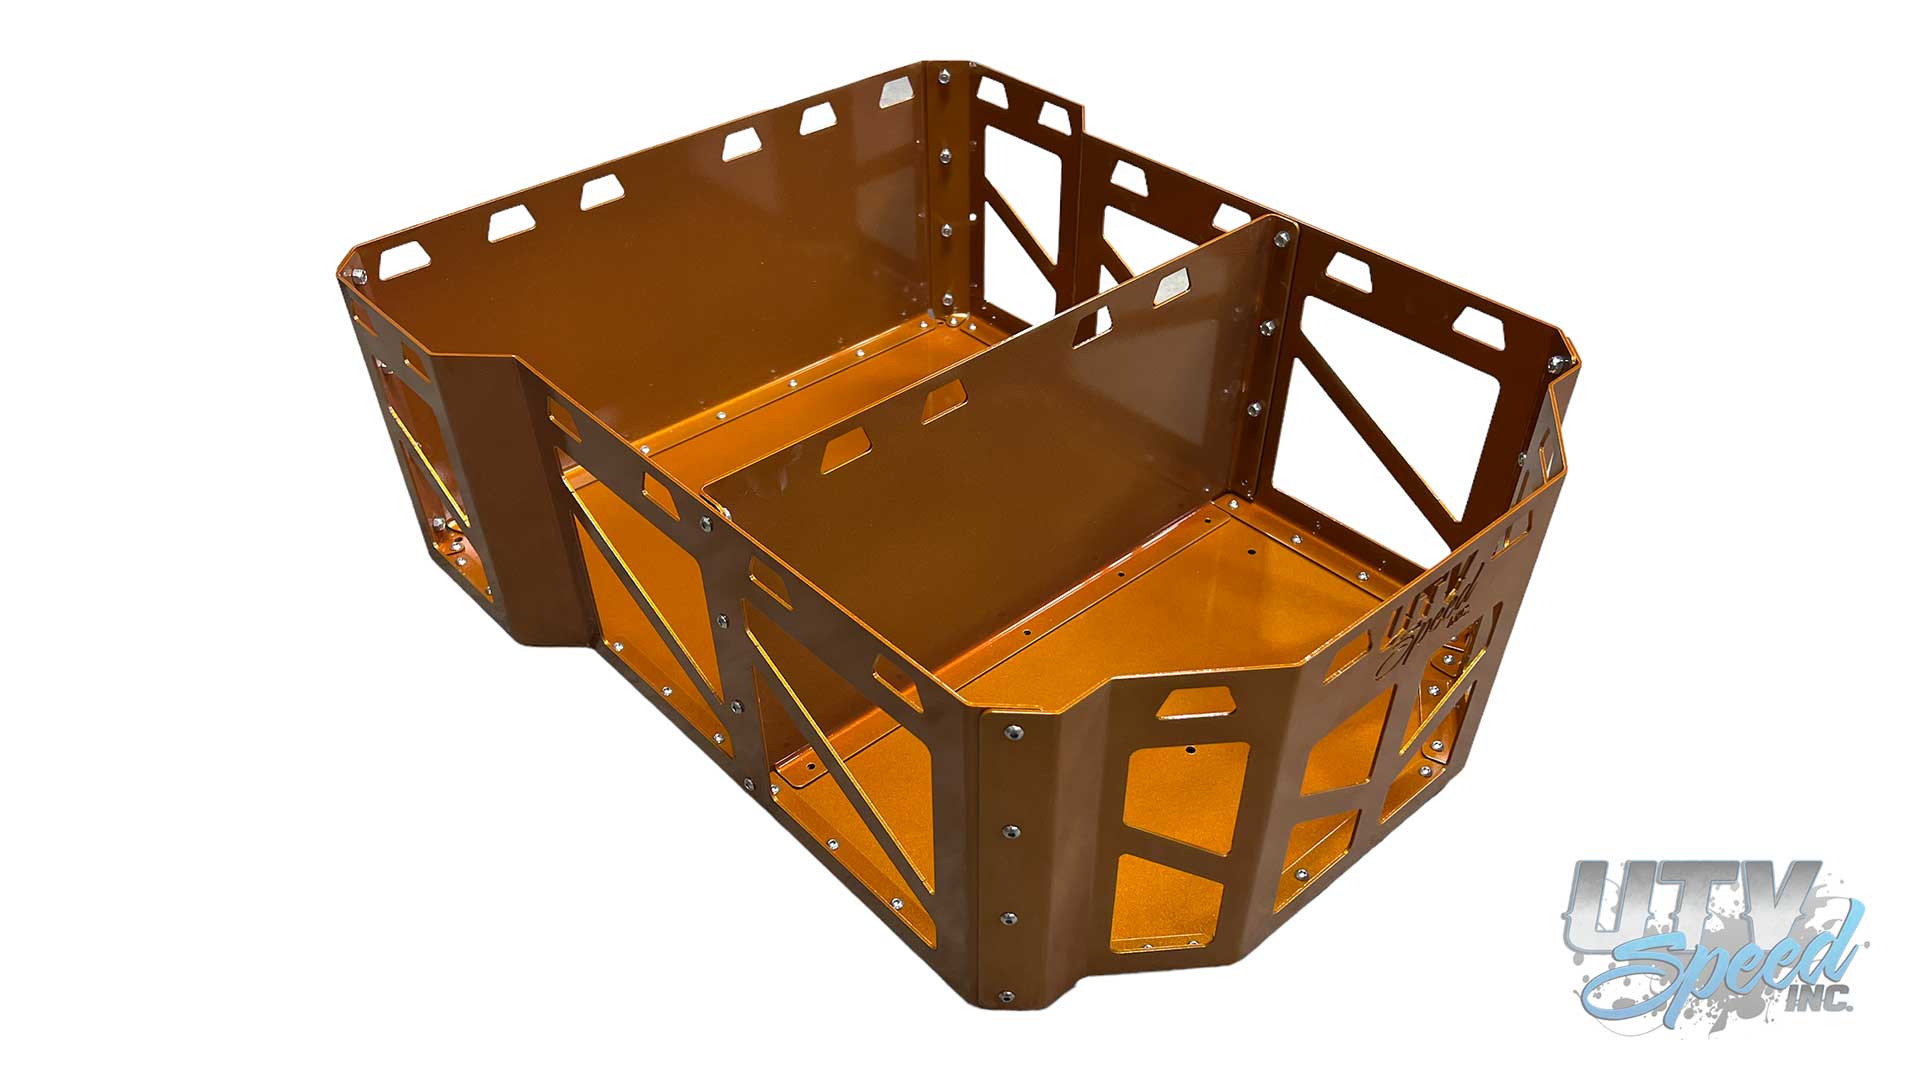 Polaris RZR 1000 Cargo Rack Bed Box by UTV Speed Inc. UTVRZR1BEDBOX Comes with three individual compartments that can be removed to make one large compartment. Bed box comes powder coated satin black and fully assembled ready for install.